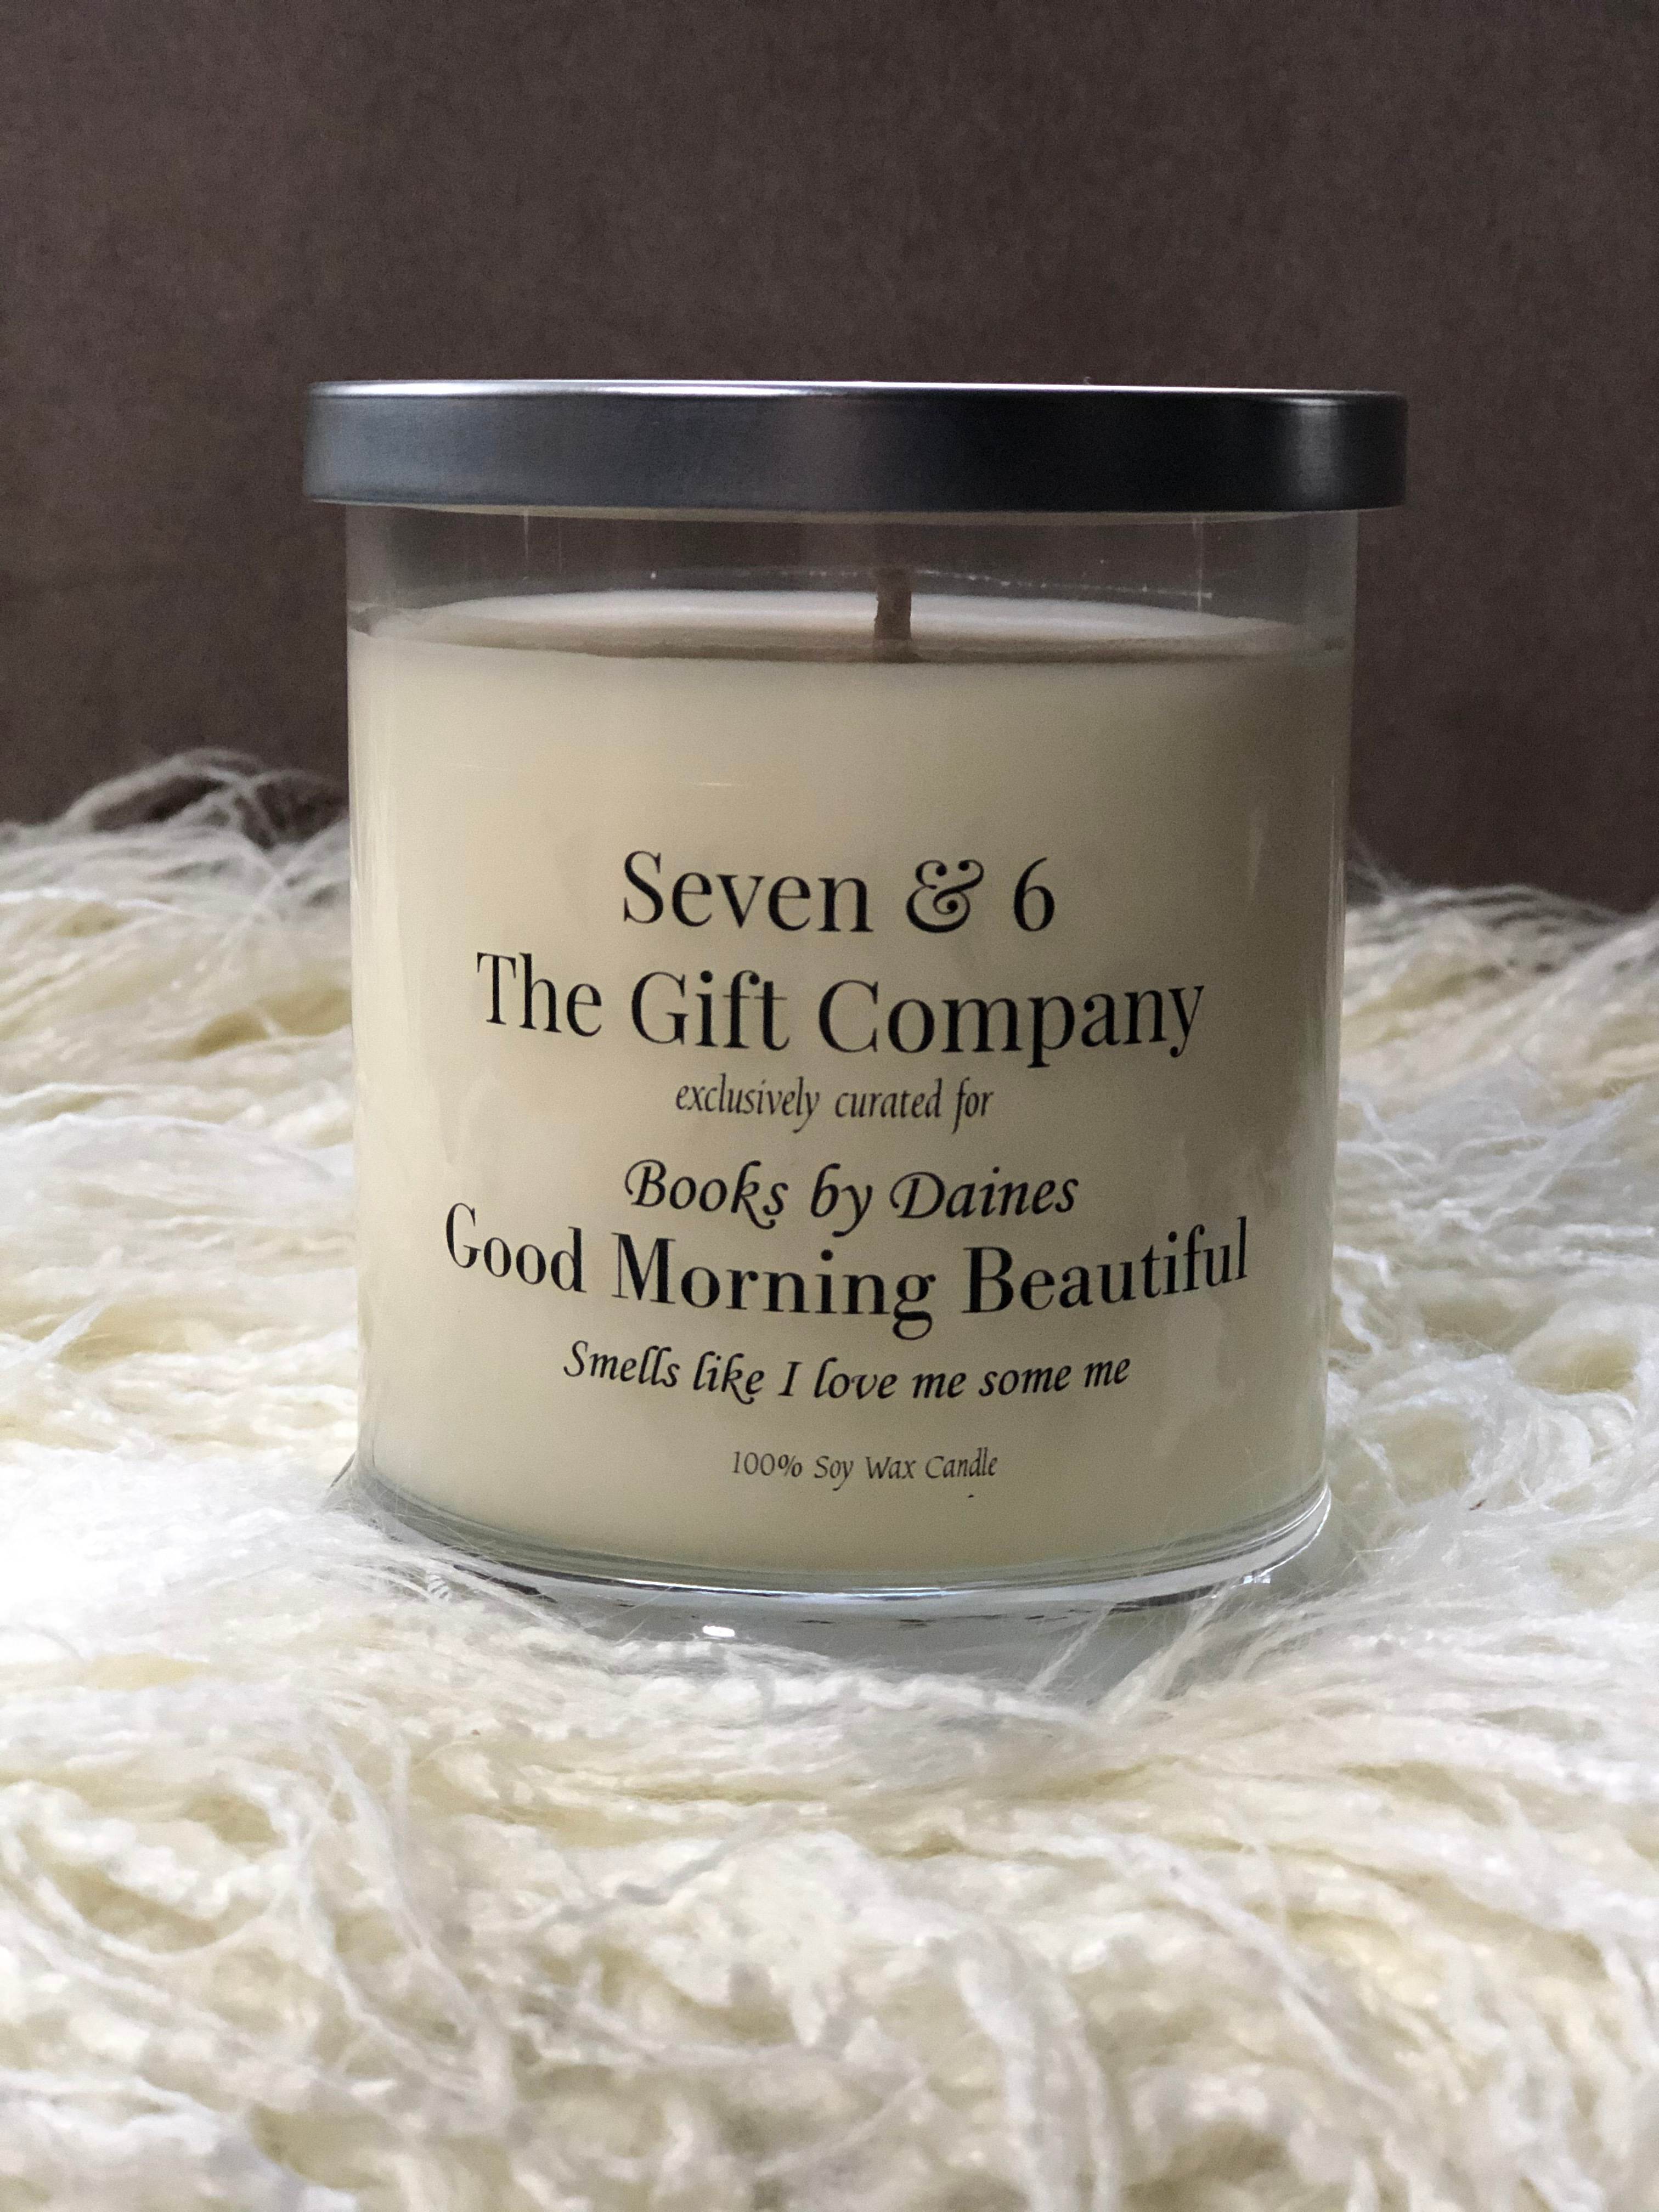 Books by Daines x Seven & 6 Gift Co. Candles